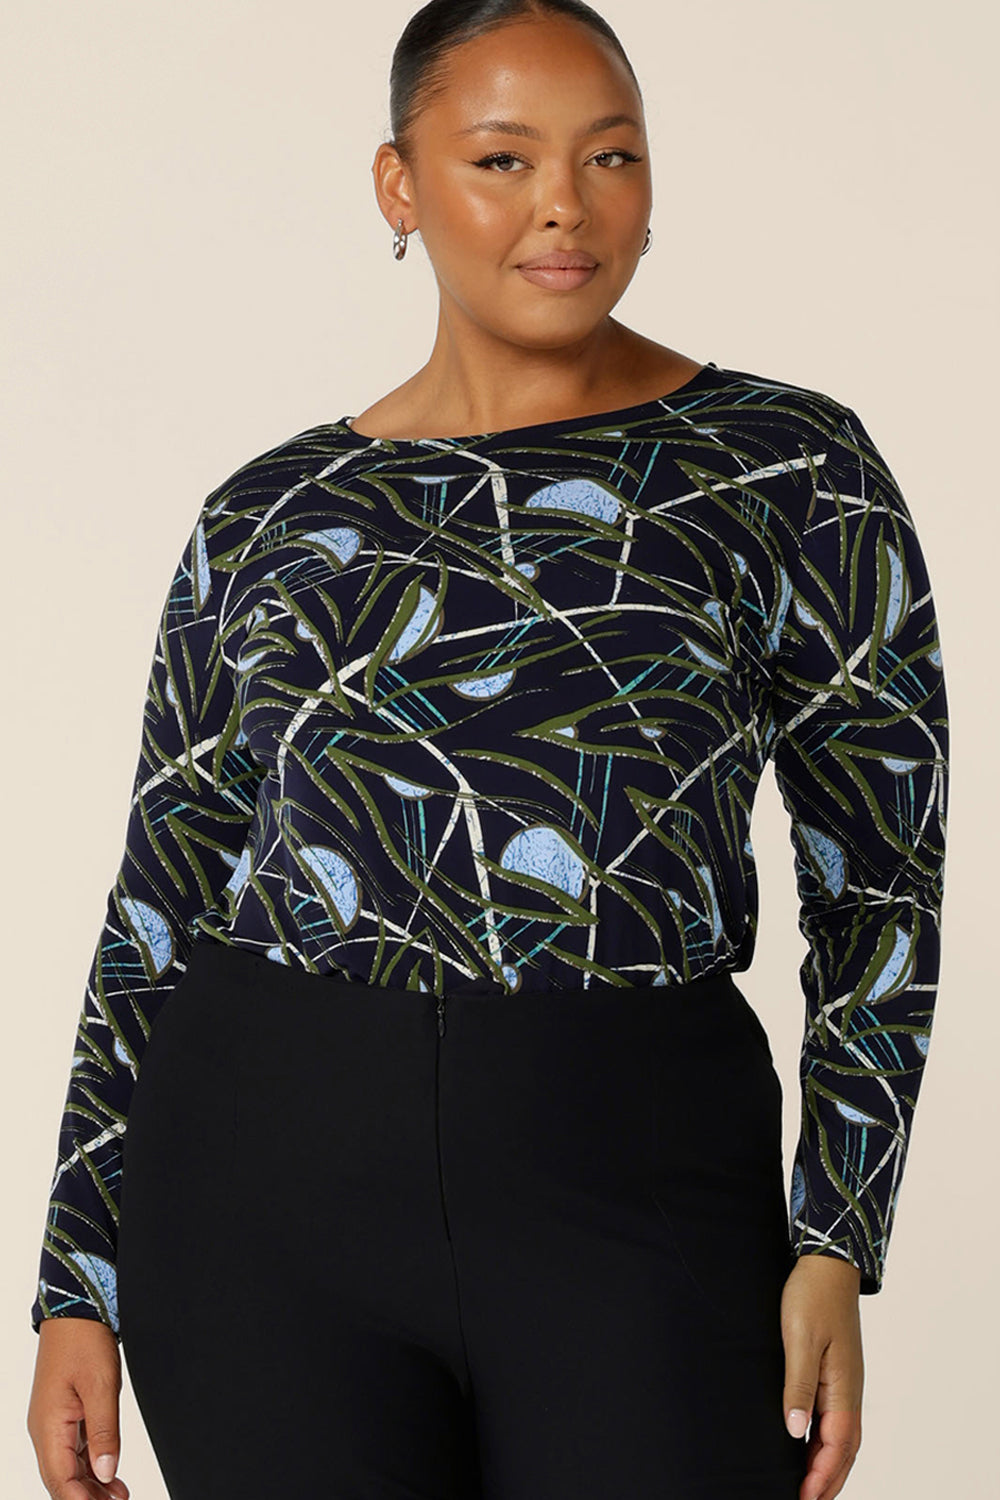 a size 18, plus size woman wears a long sleeve, boat neck top by Australian and New Zealand women's clothing brand, L&F. Featuring a blue, green and white print on a navy jersey base, this top is a great top for work and corporate wear.